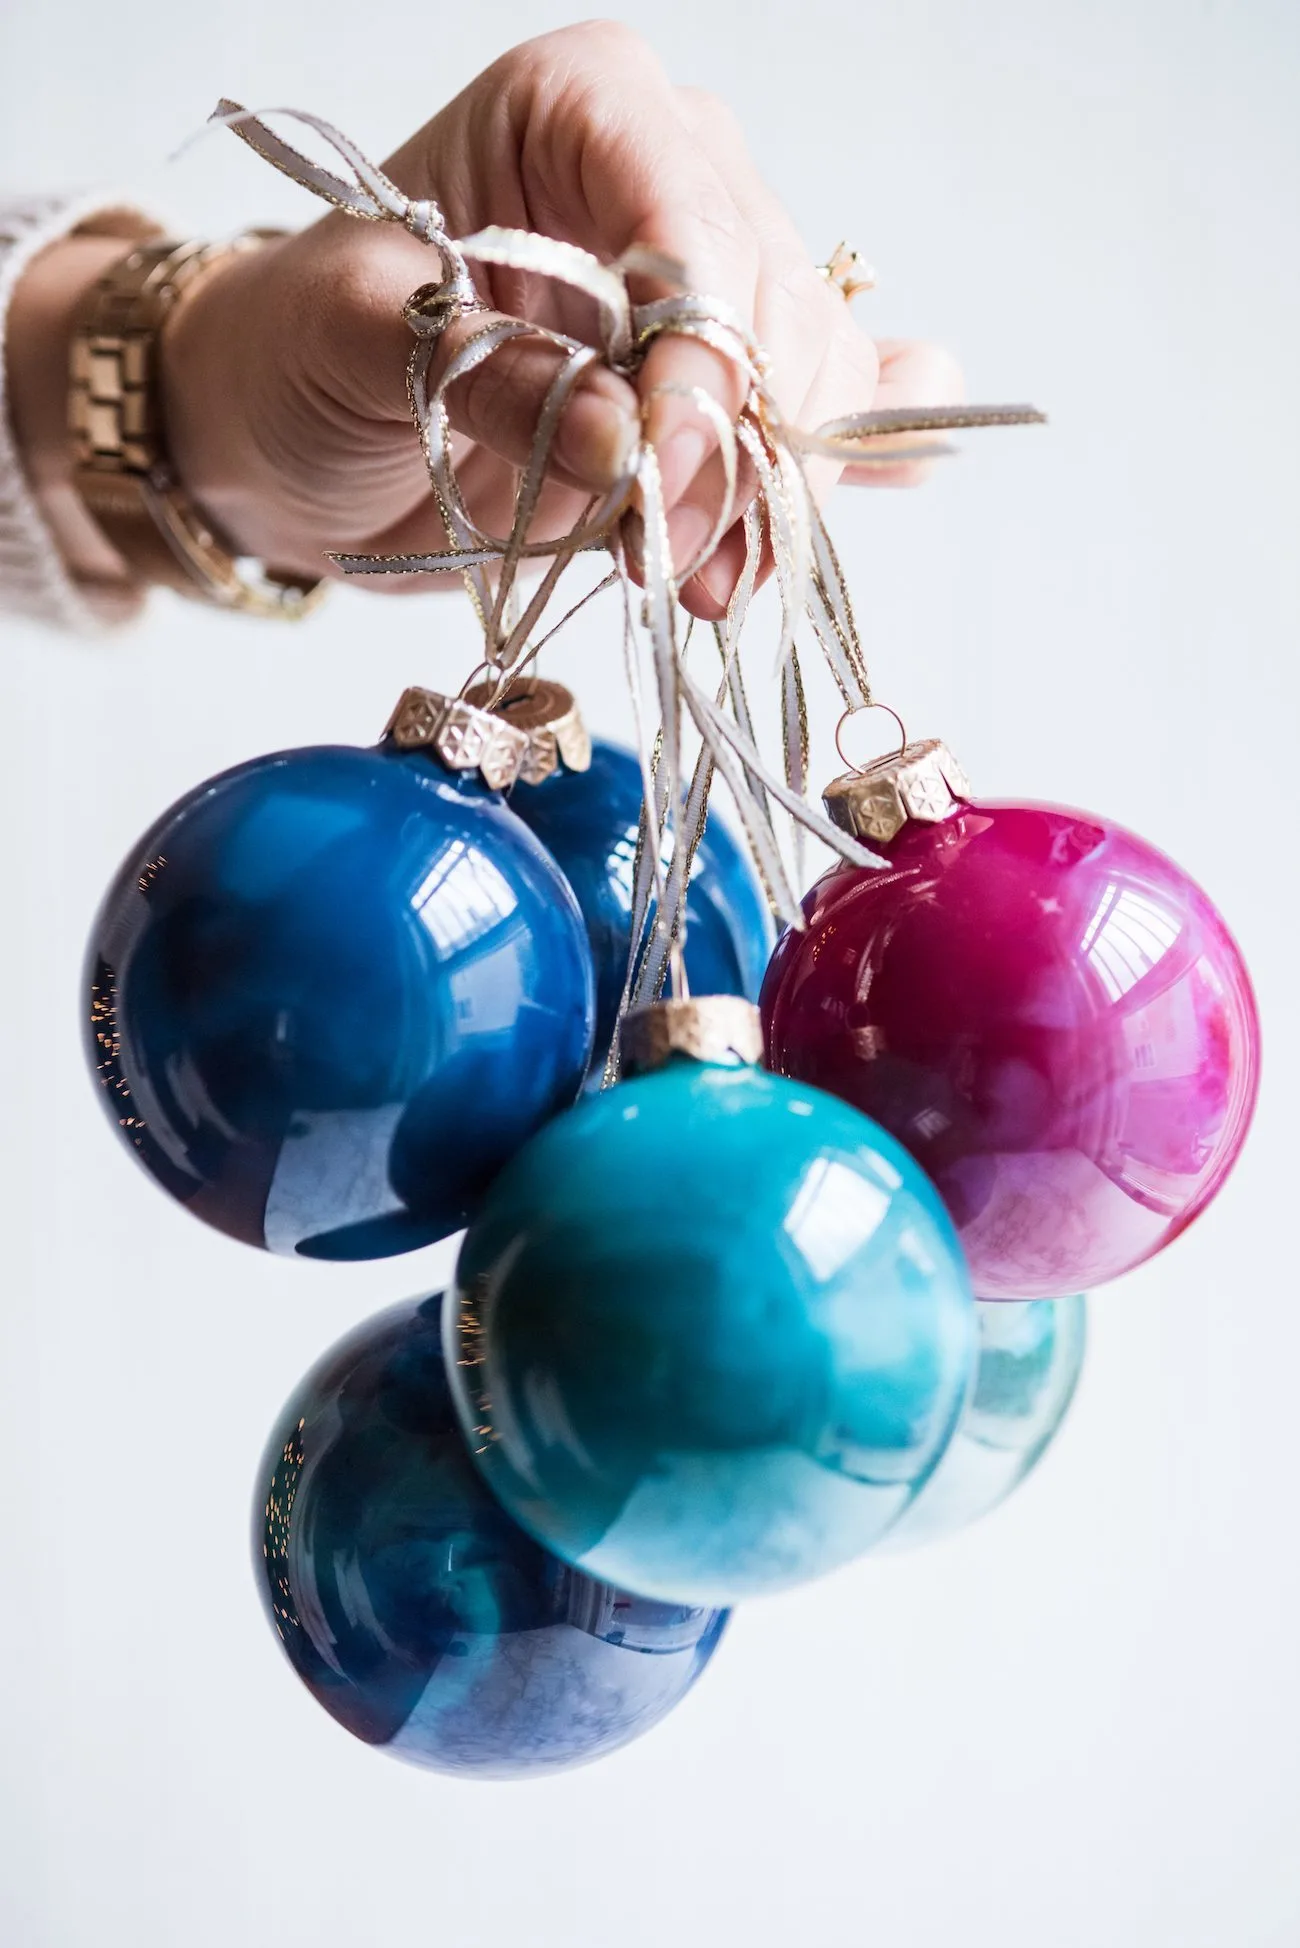 DIY Swirled Melted Crayon Ornaments | DIY ornaments, holiday entertaining tips, holiday cocktail recipes, homemade ornaments and more from @cydconverse